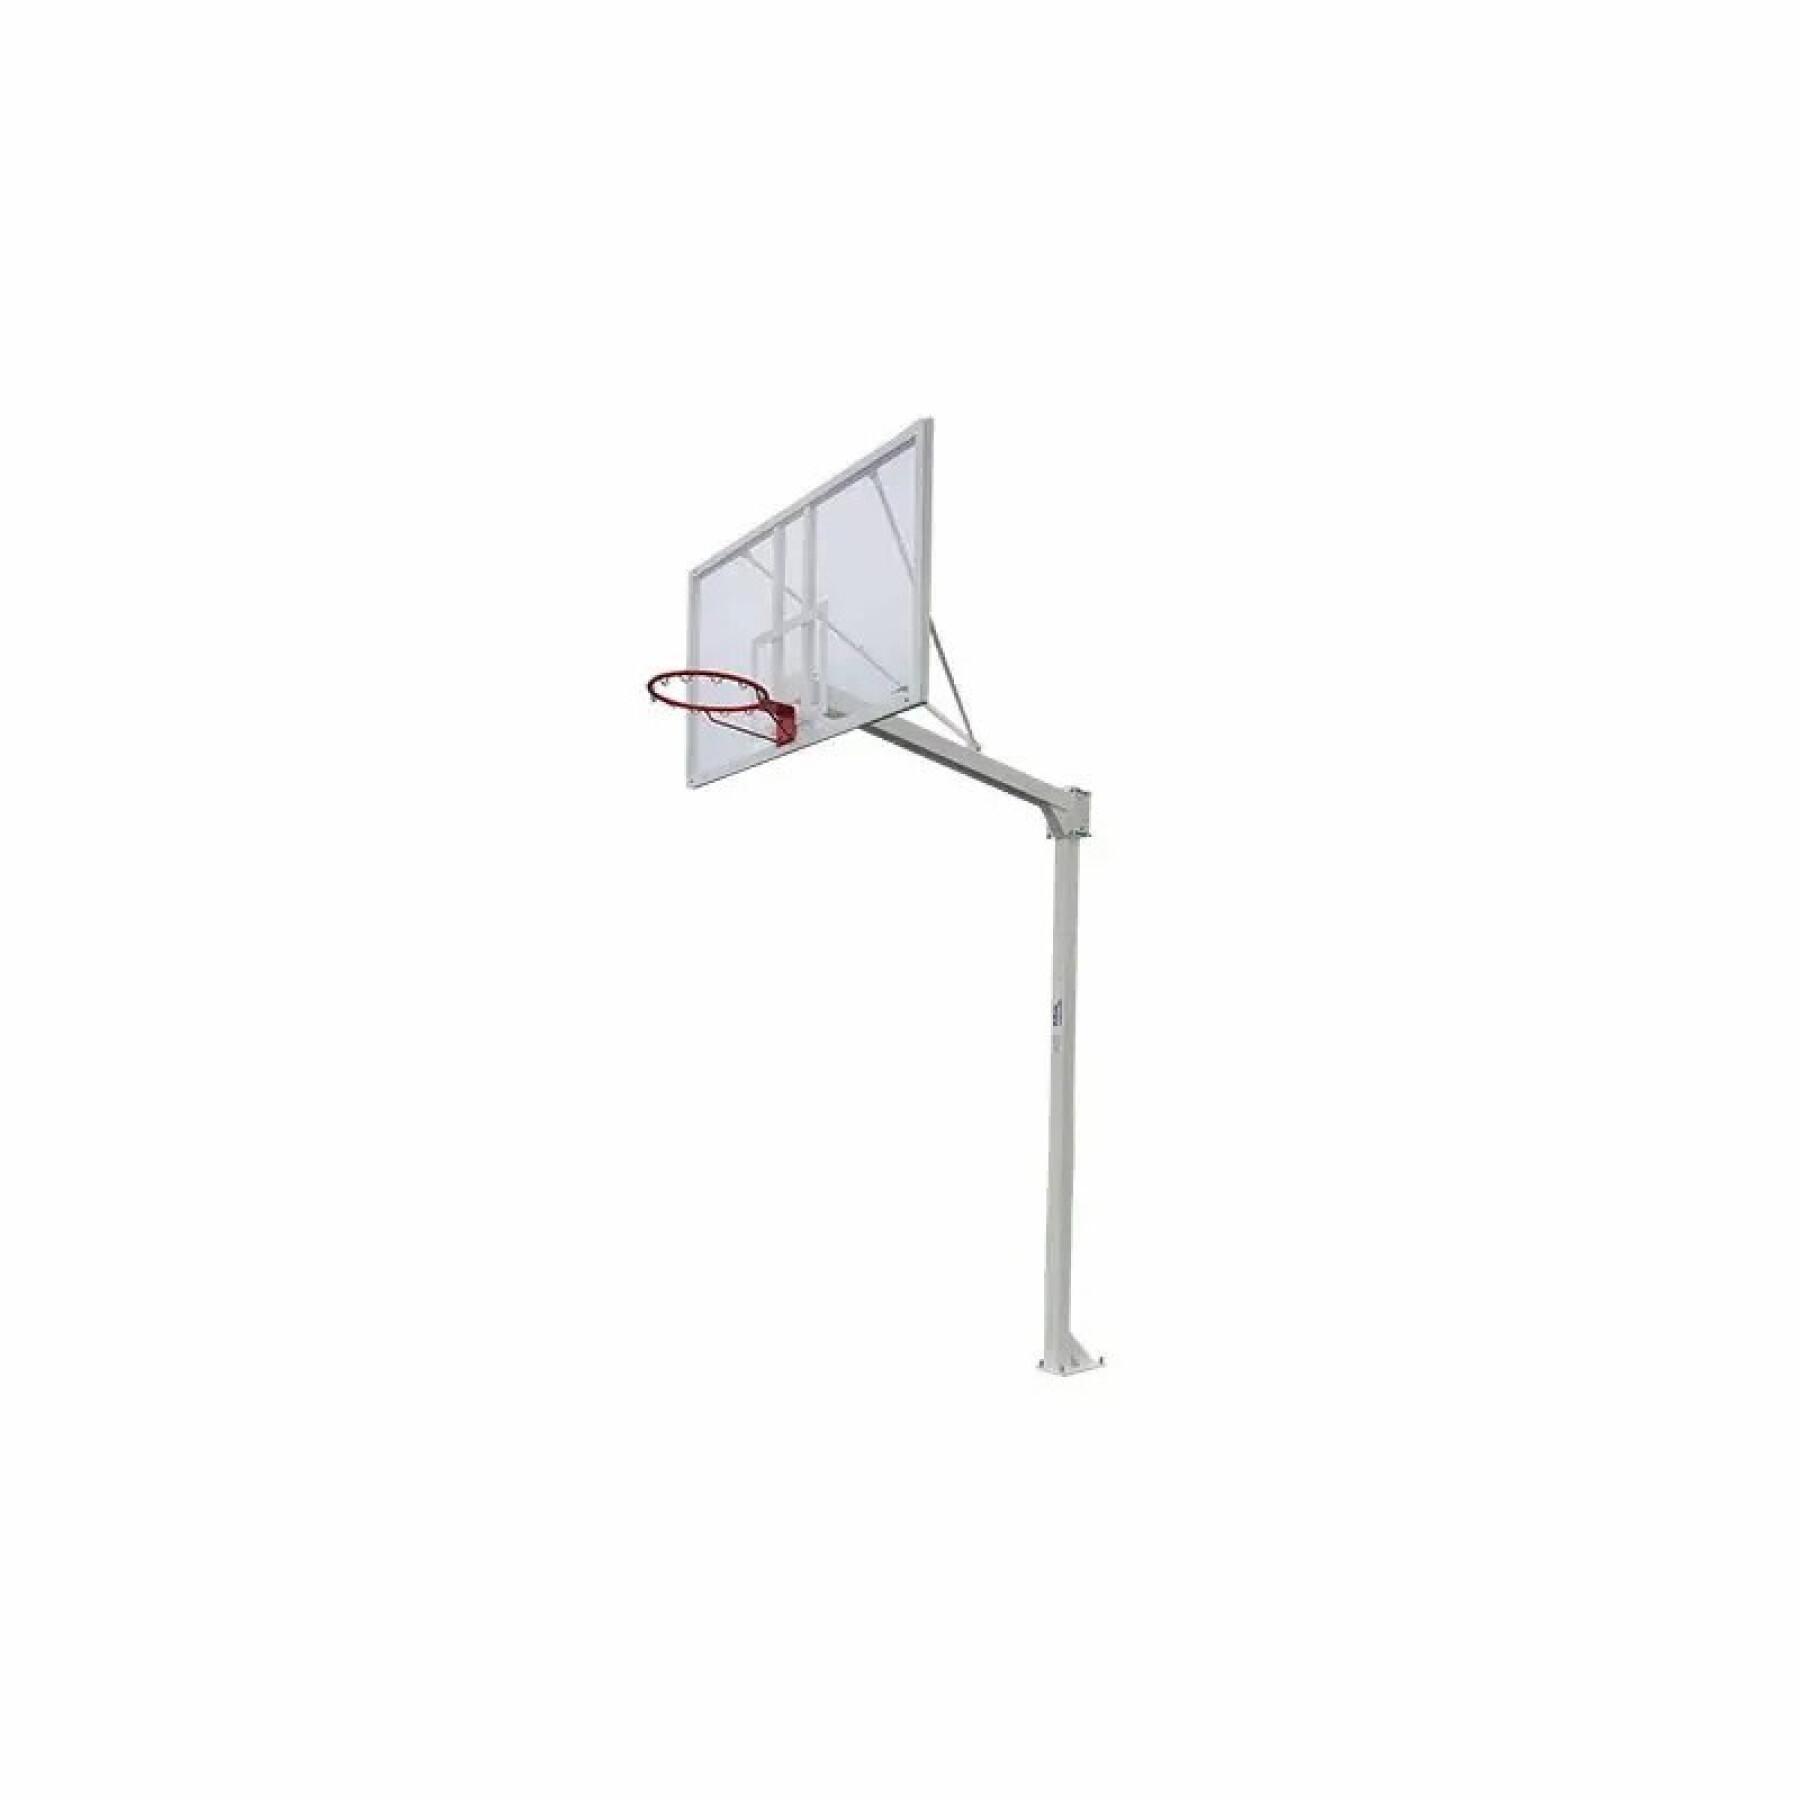 Basket-Center: Basketball equipment and accessories